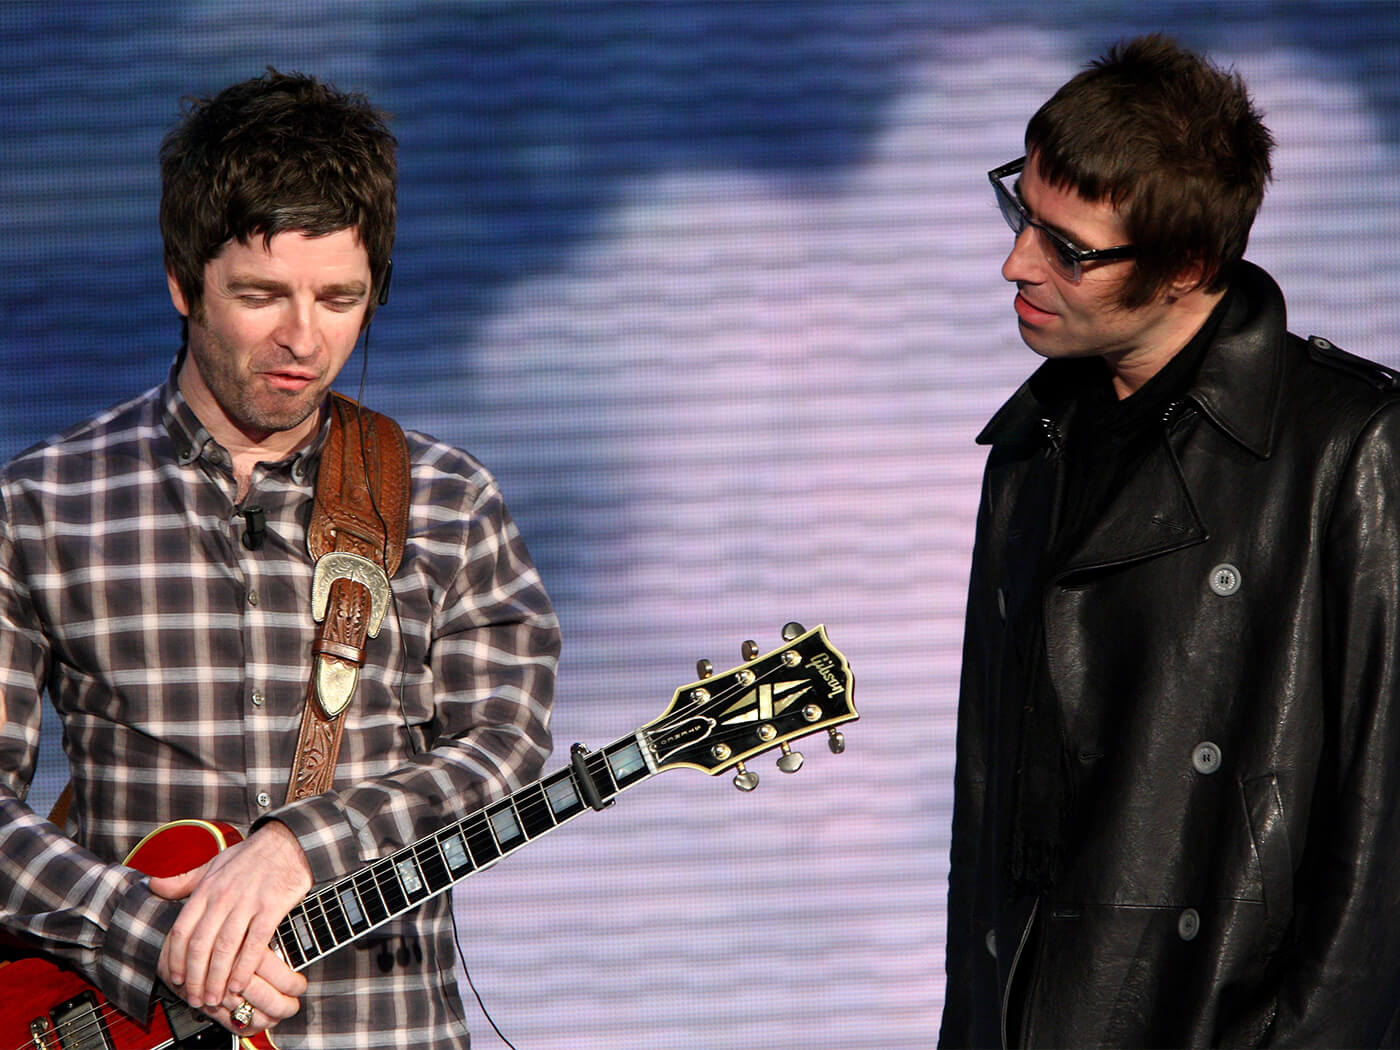 Noel and Liam Gallagher onstage